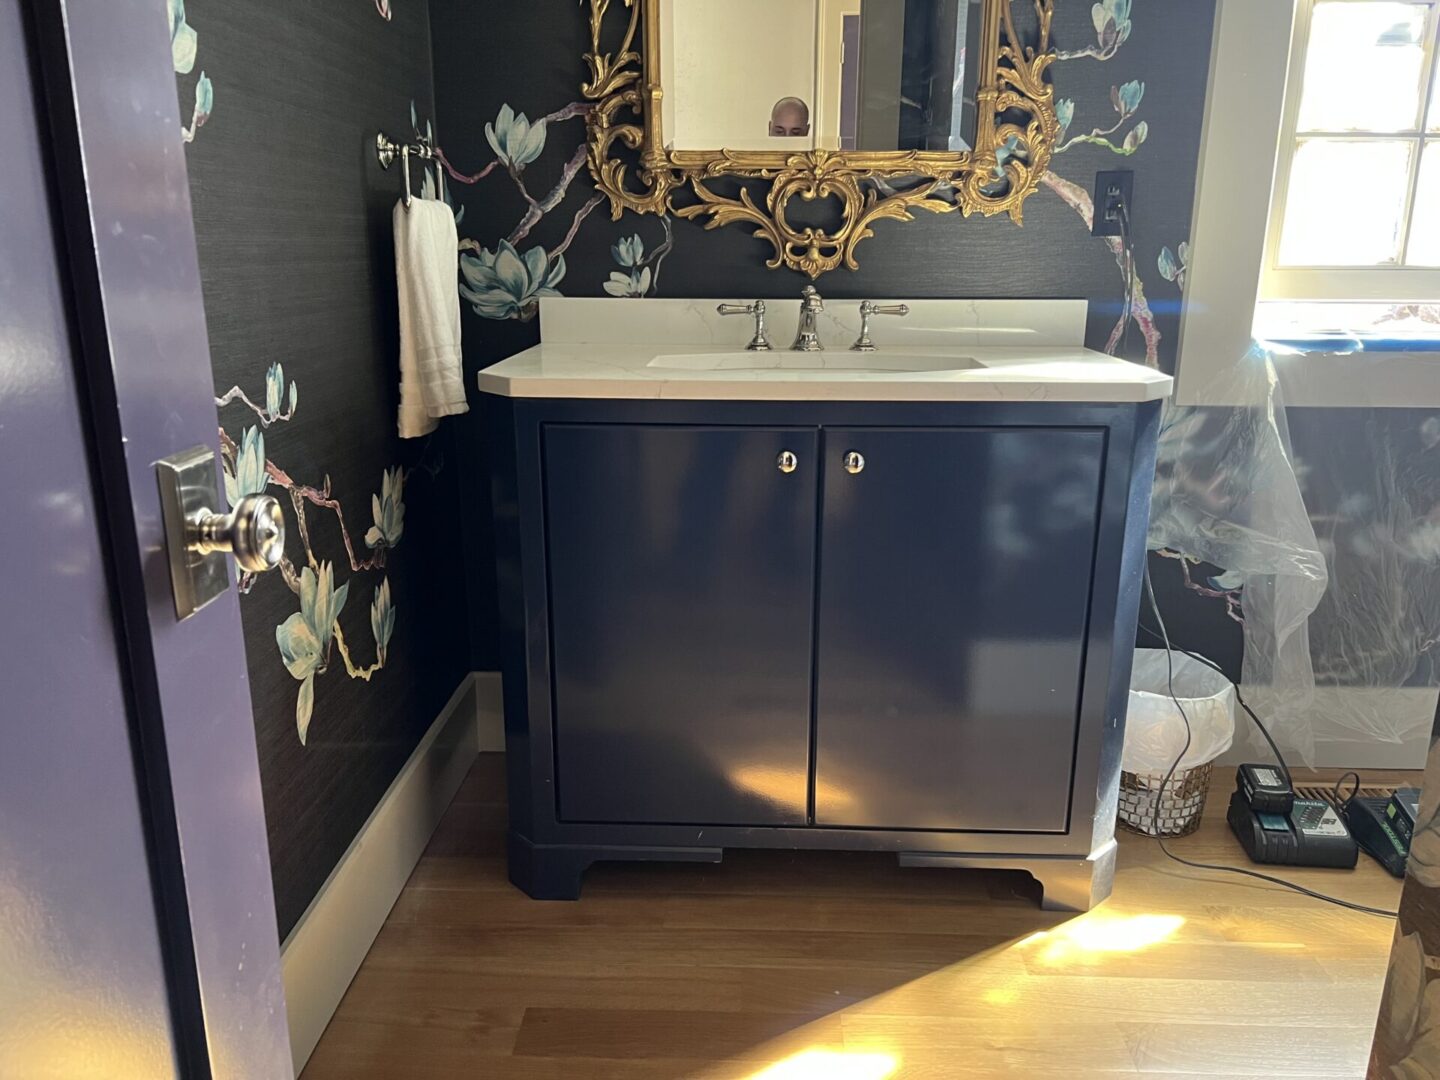 Wash area with mirror and blue cabinets